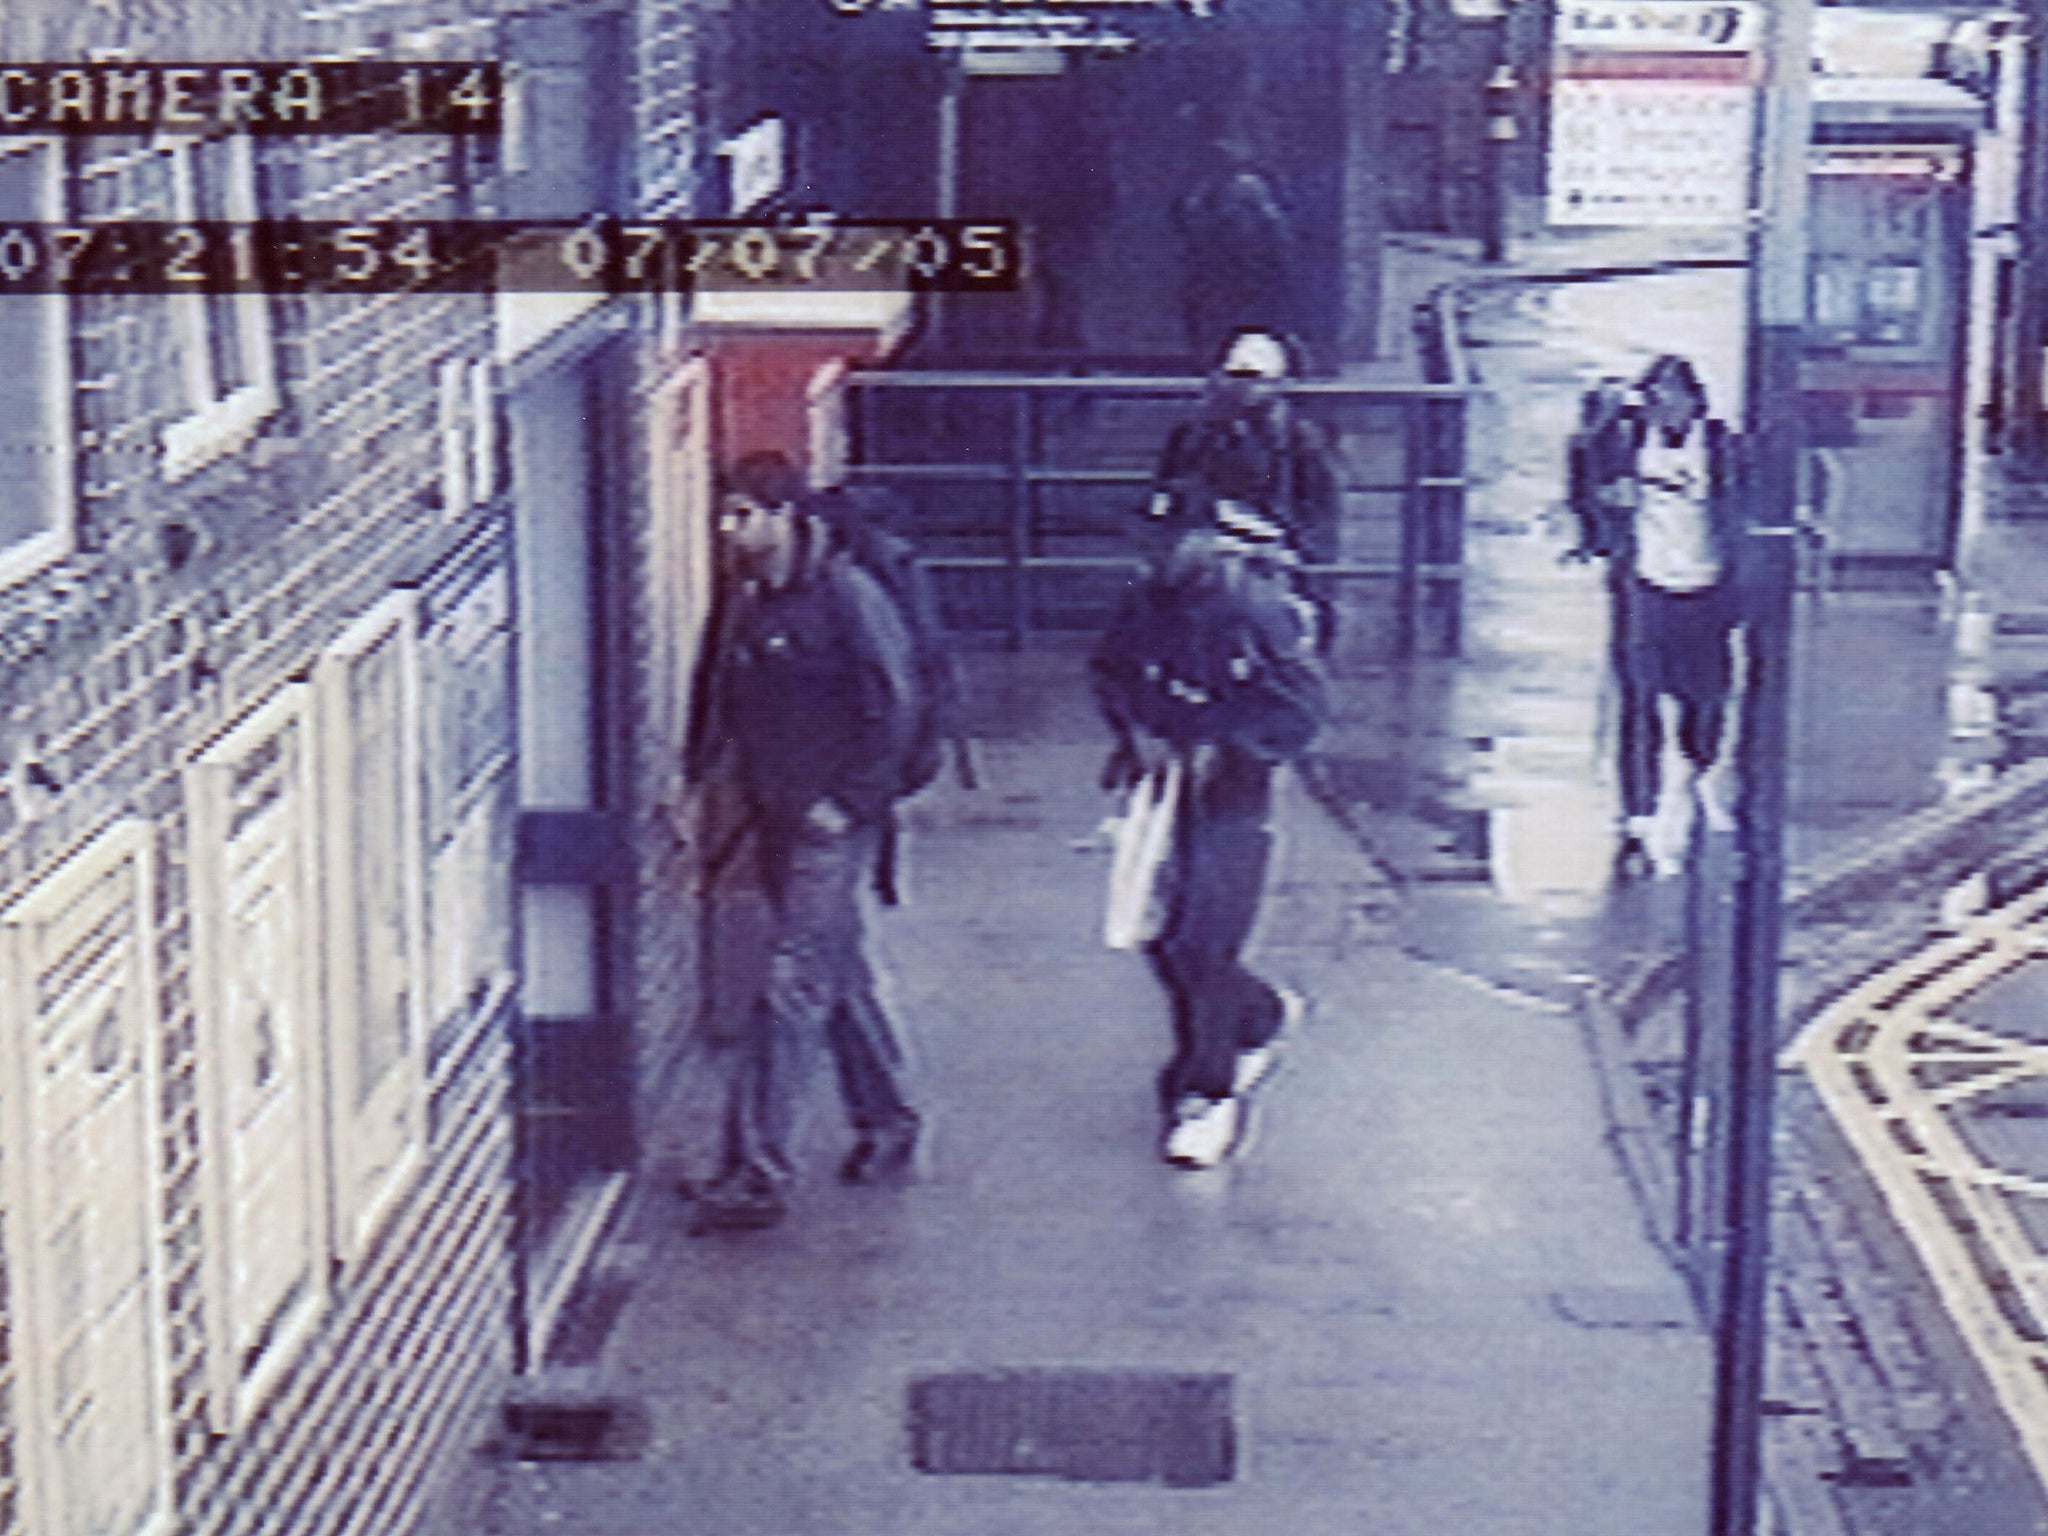 An image taken from CCTV footage of three of the four London bombers. From left to right: Mohammed Sidique Khan, Germaine Lindsay and Shahzad Tanweer arriving at King's Cross 